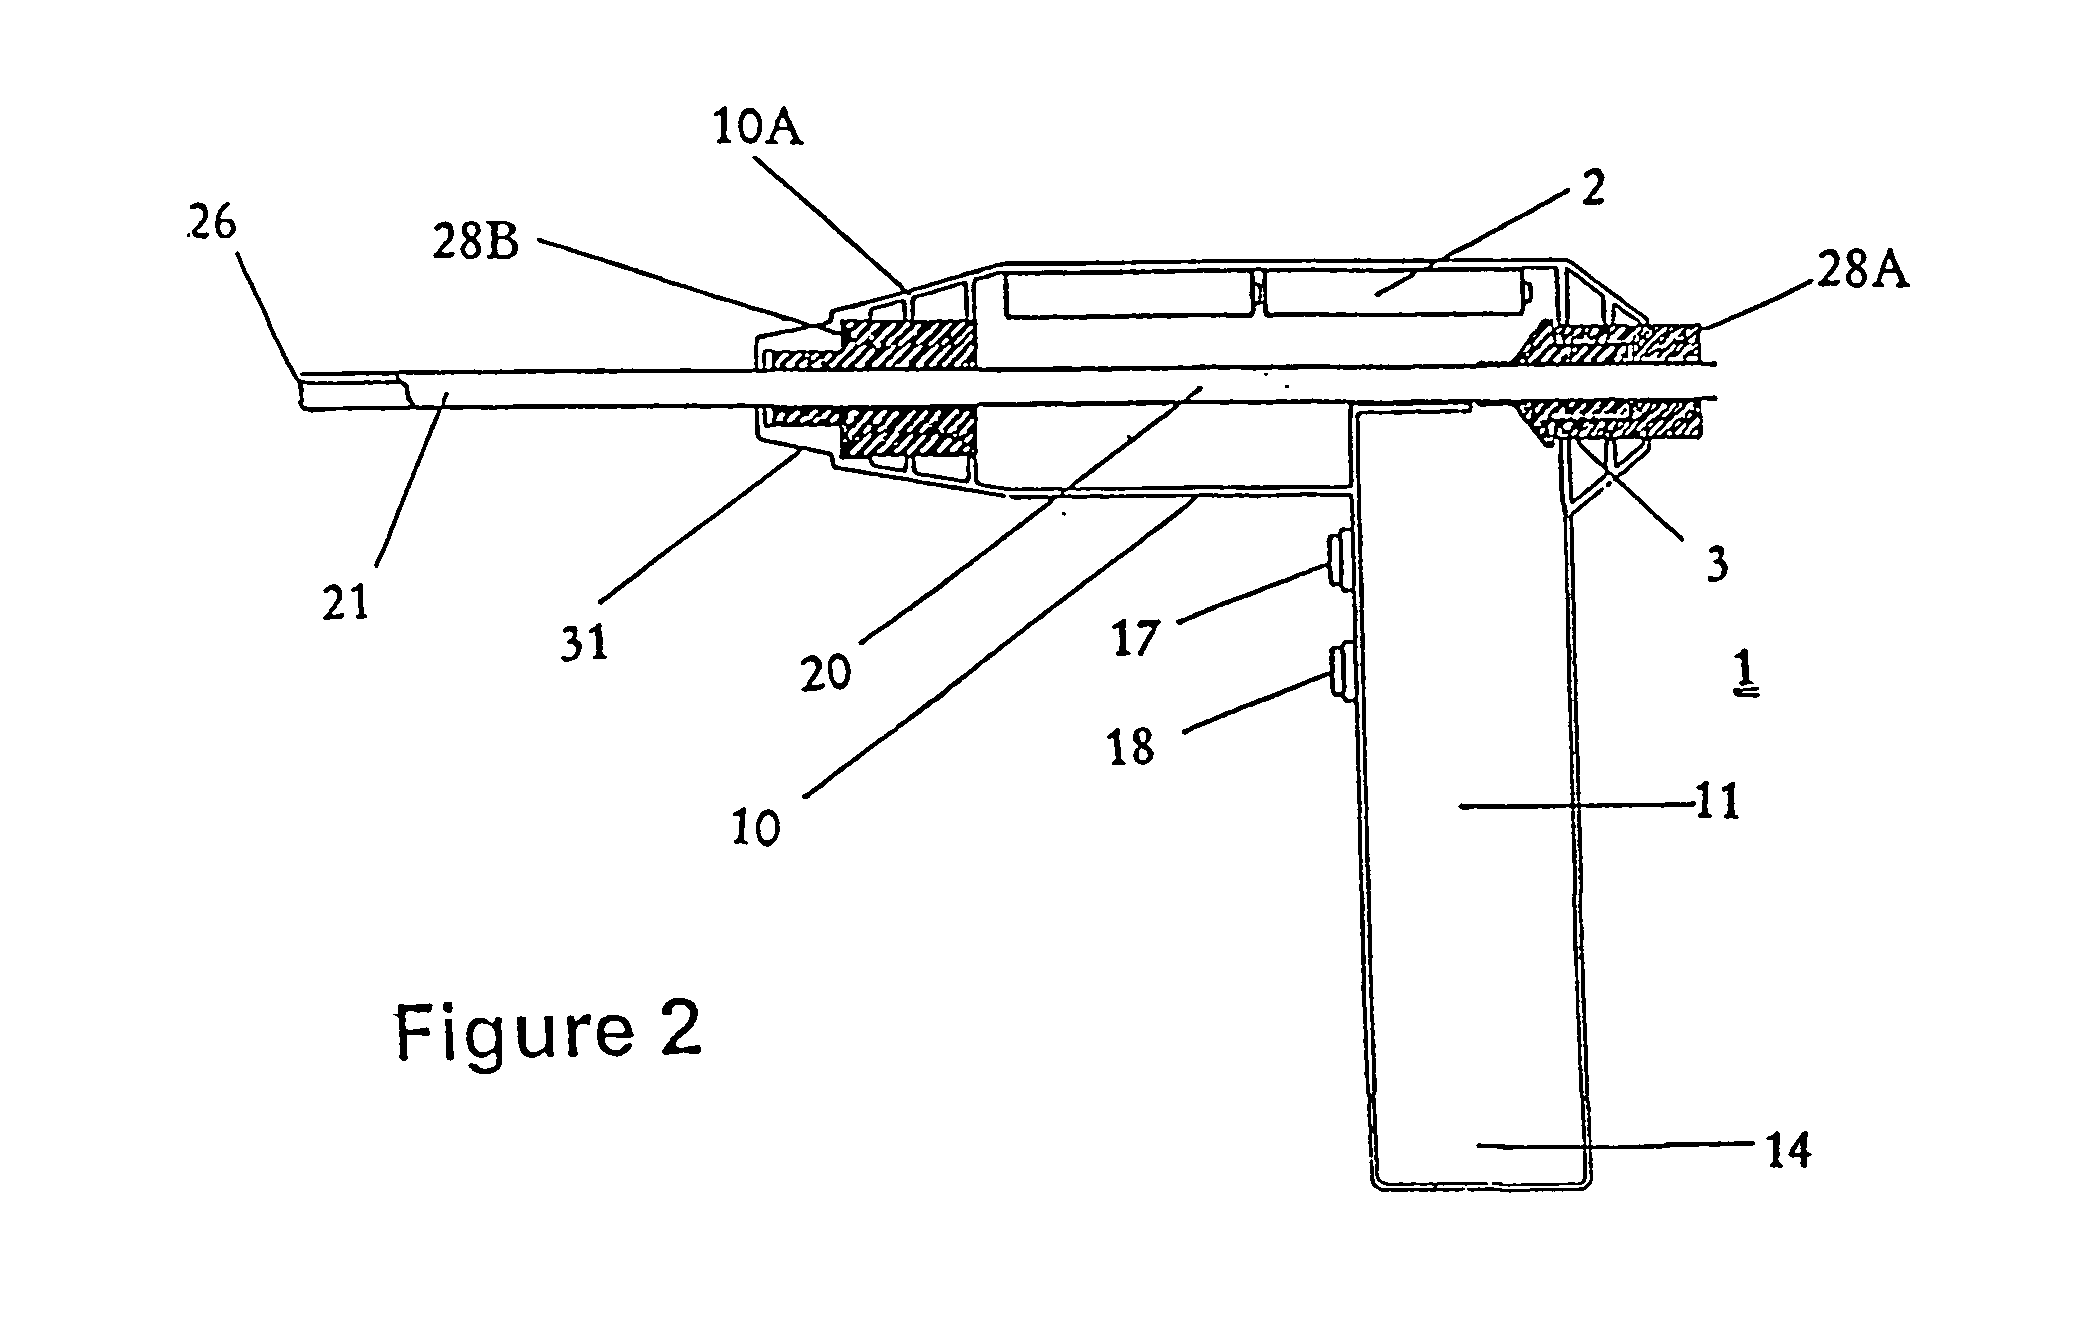 Orthopedic medical device with unitary components